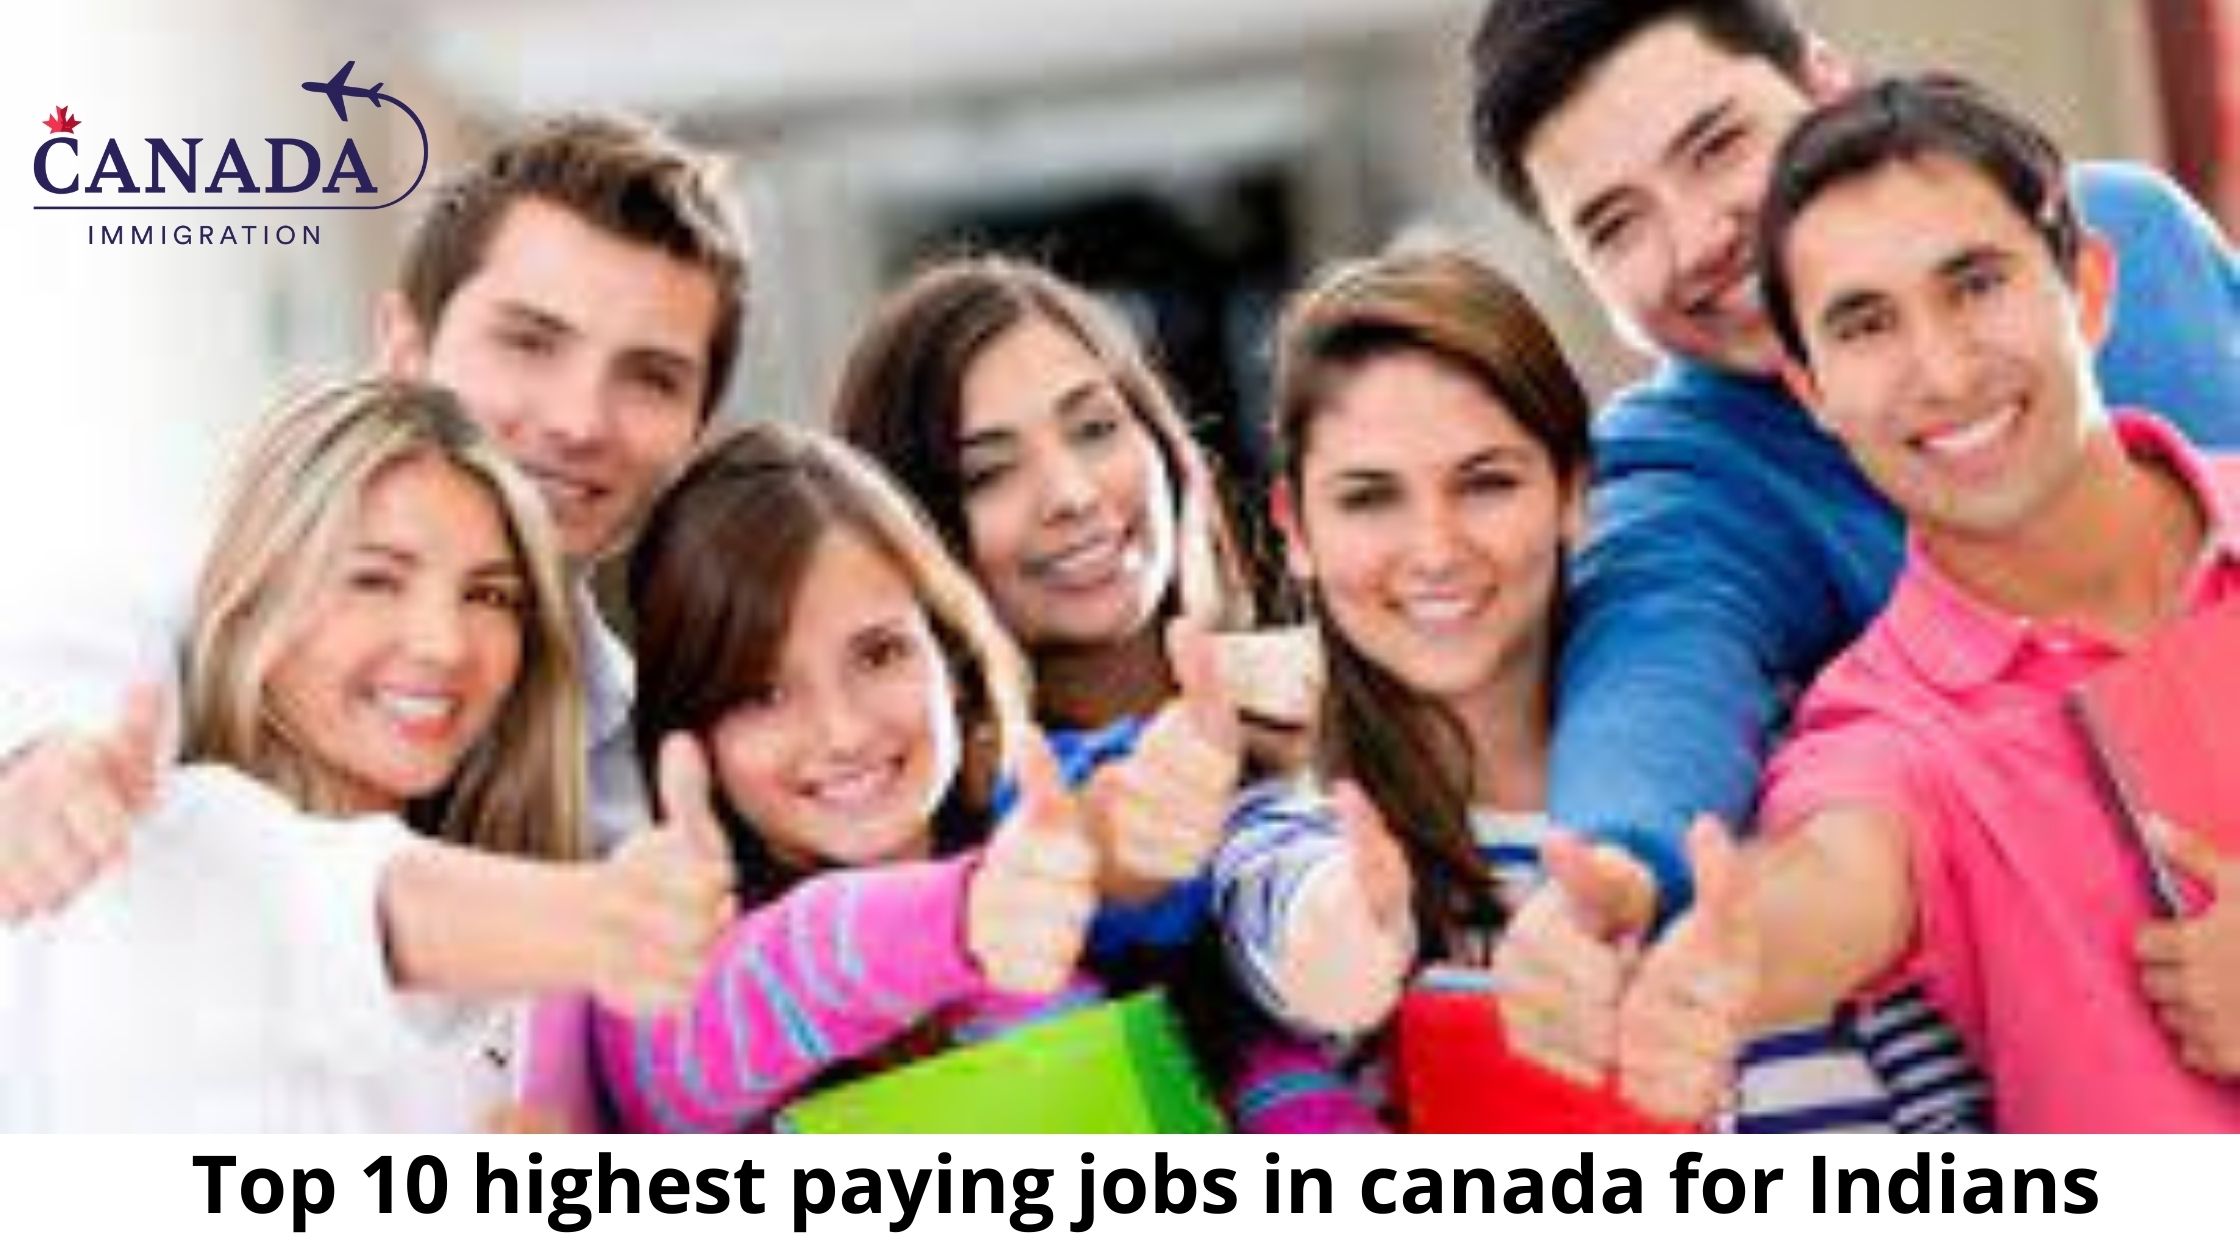 Top 10 Highest Paying Jobs in Canada for Indians